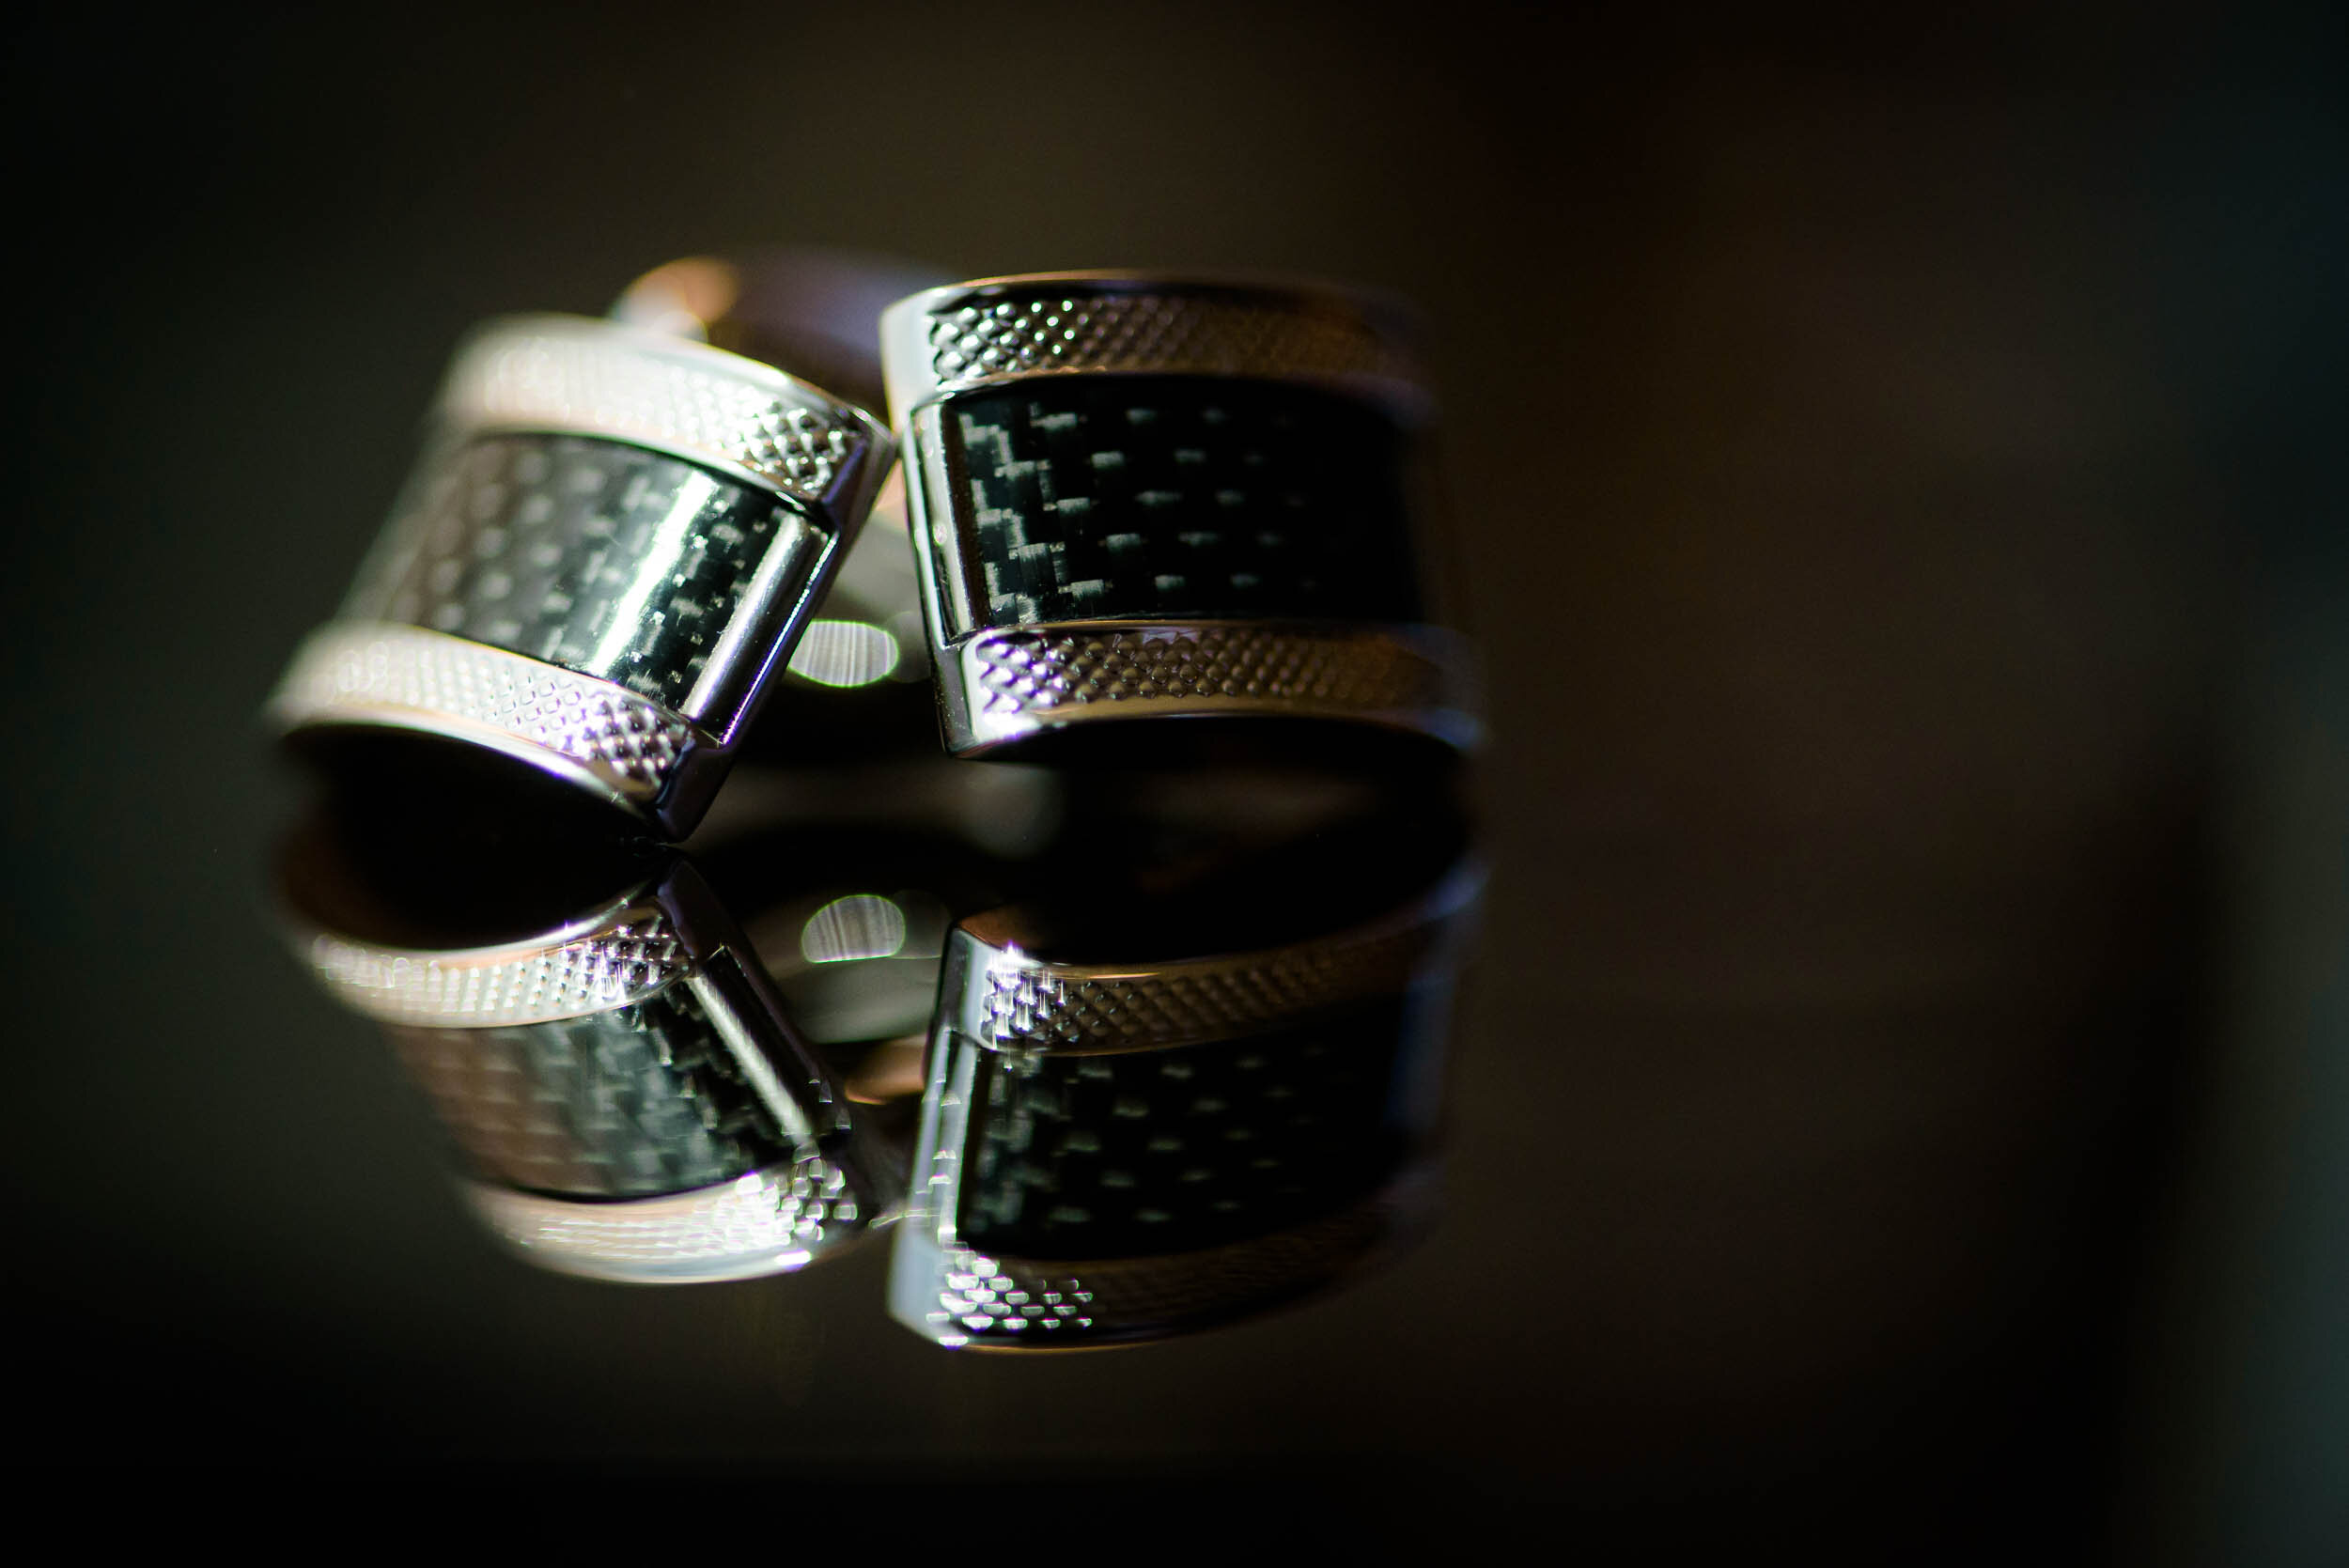 Detail photo of cufflinks: Ravenswood Event Center Chicago wedding captured by J. Brown Photography.  